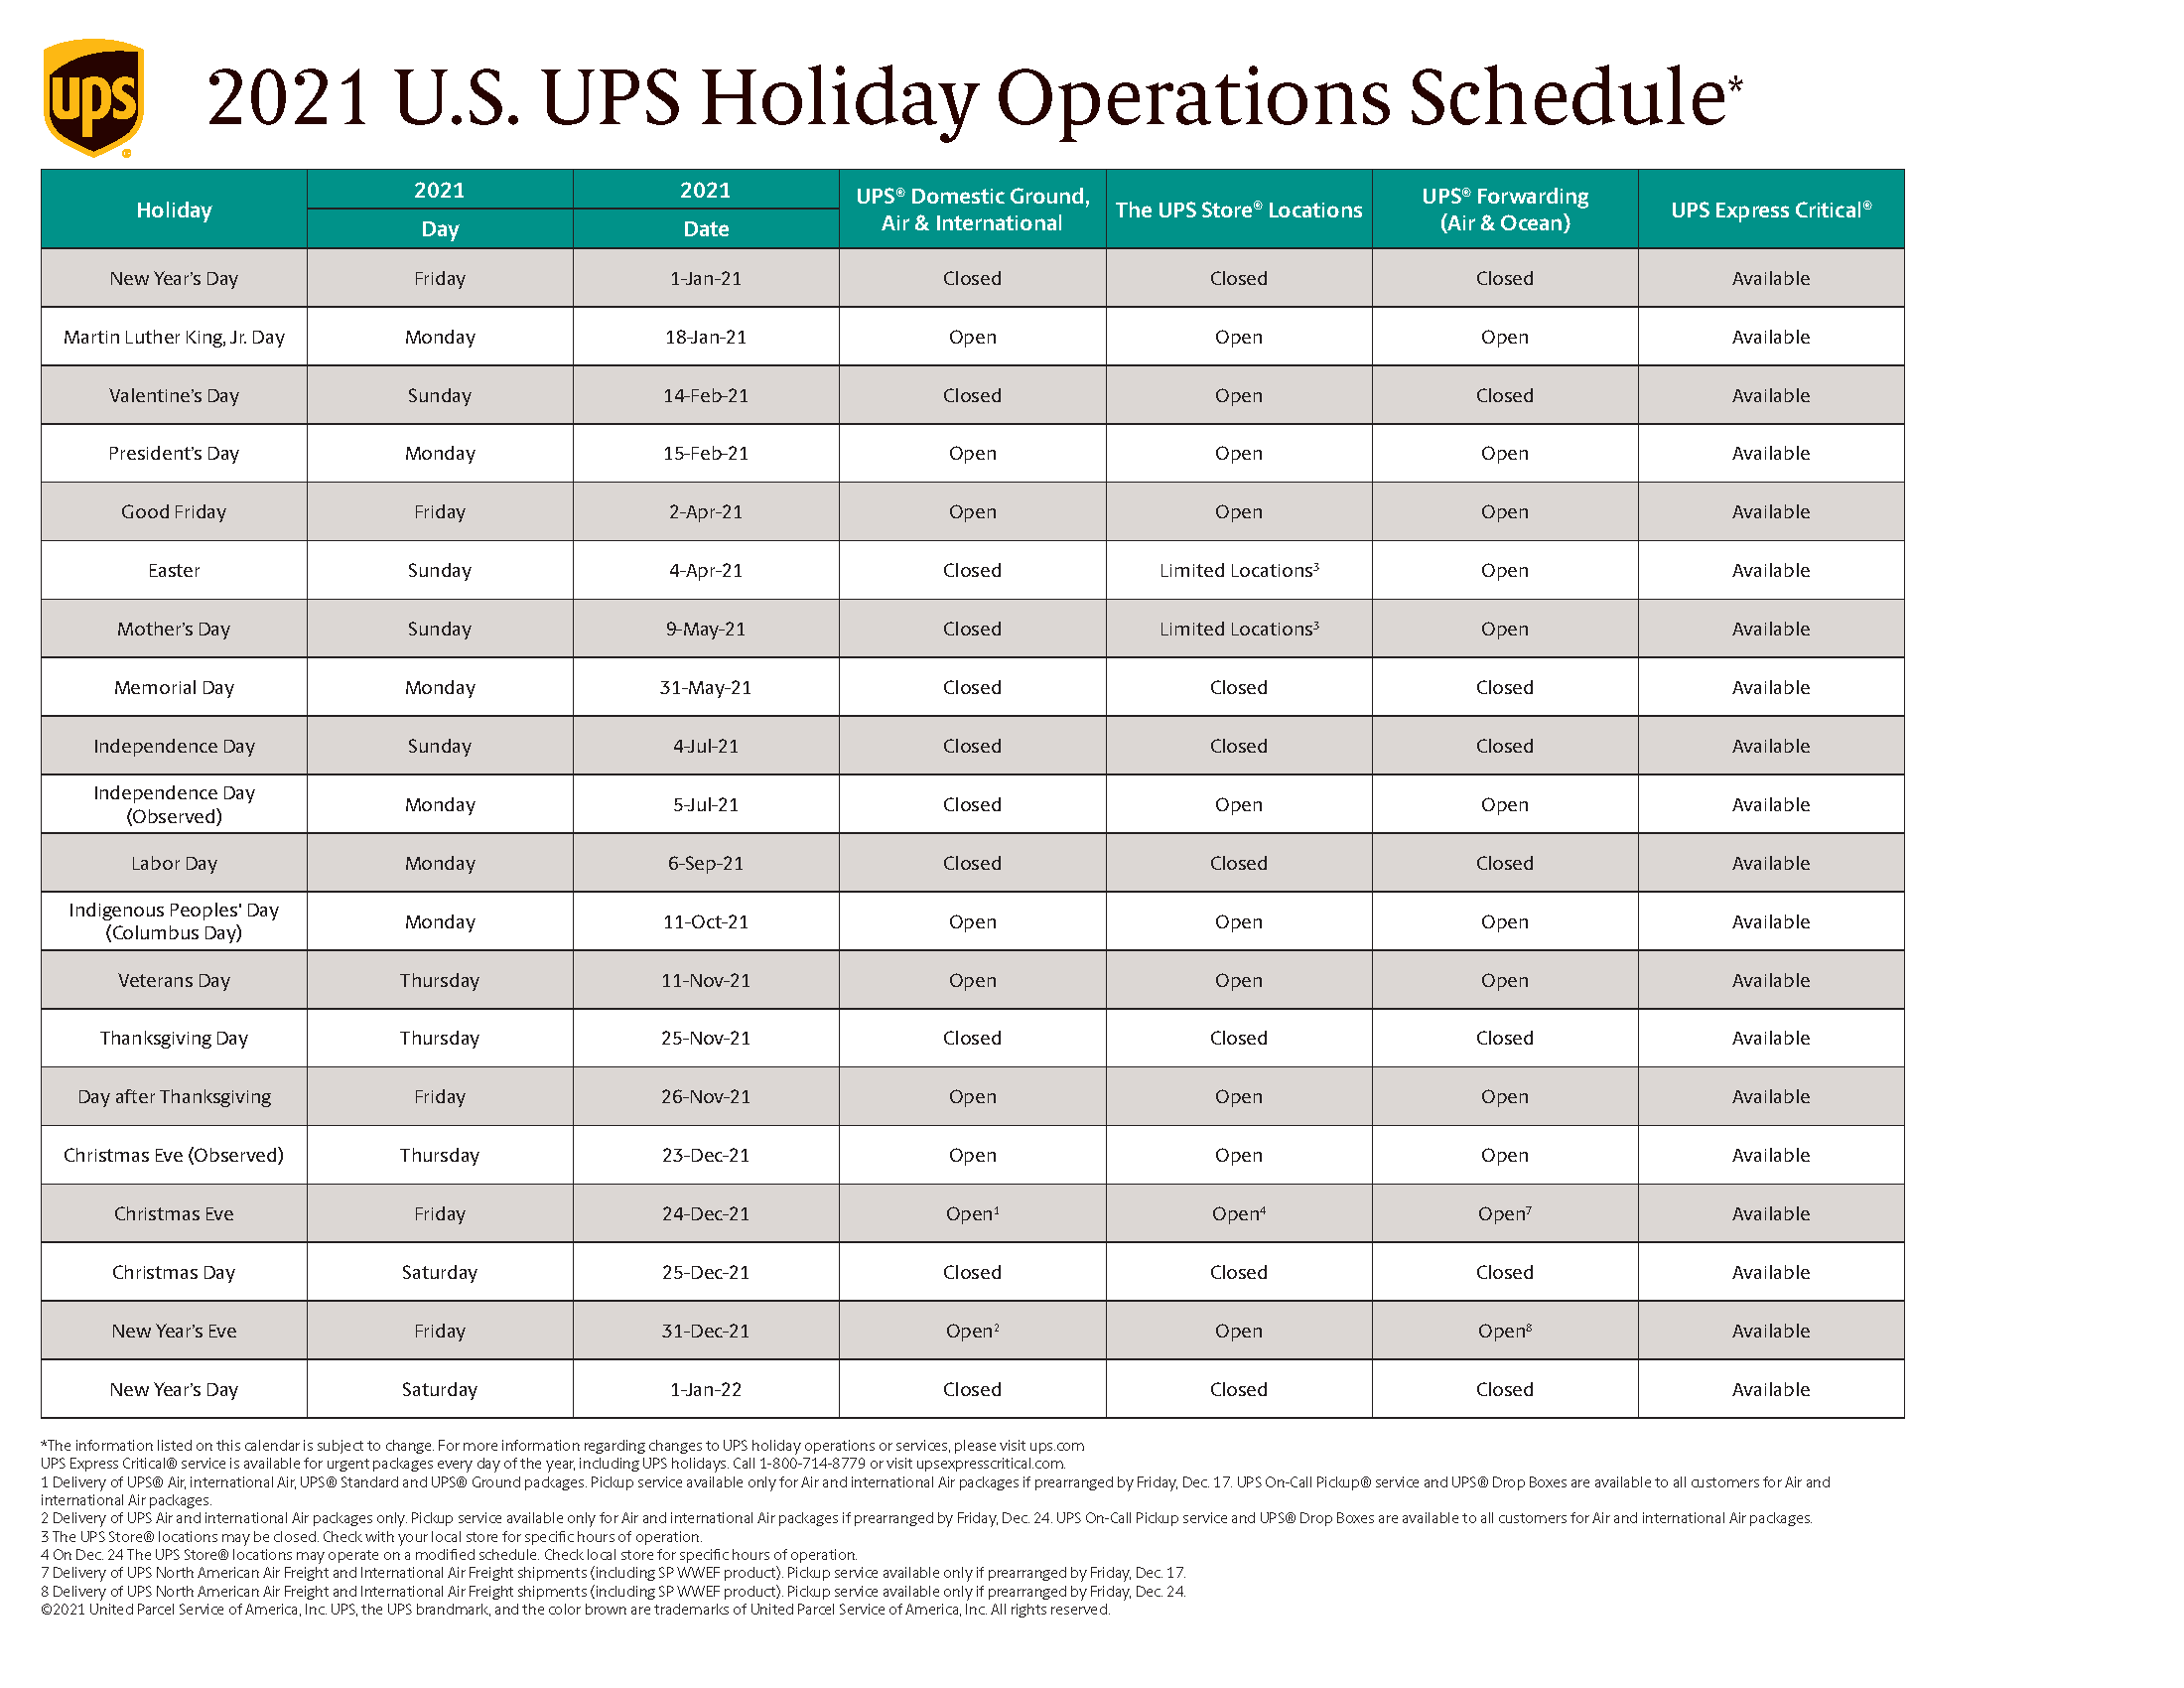 2021 UPS Holiday Schedule